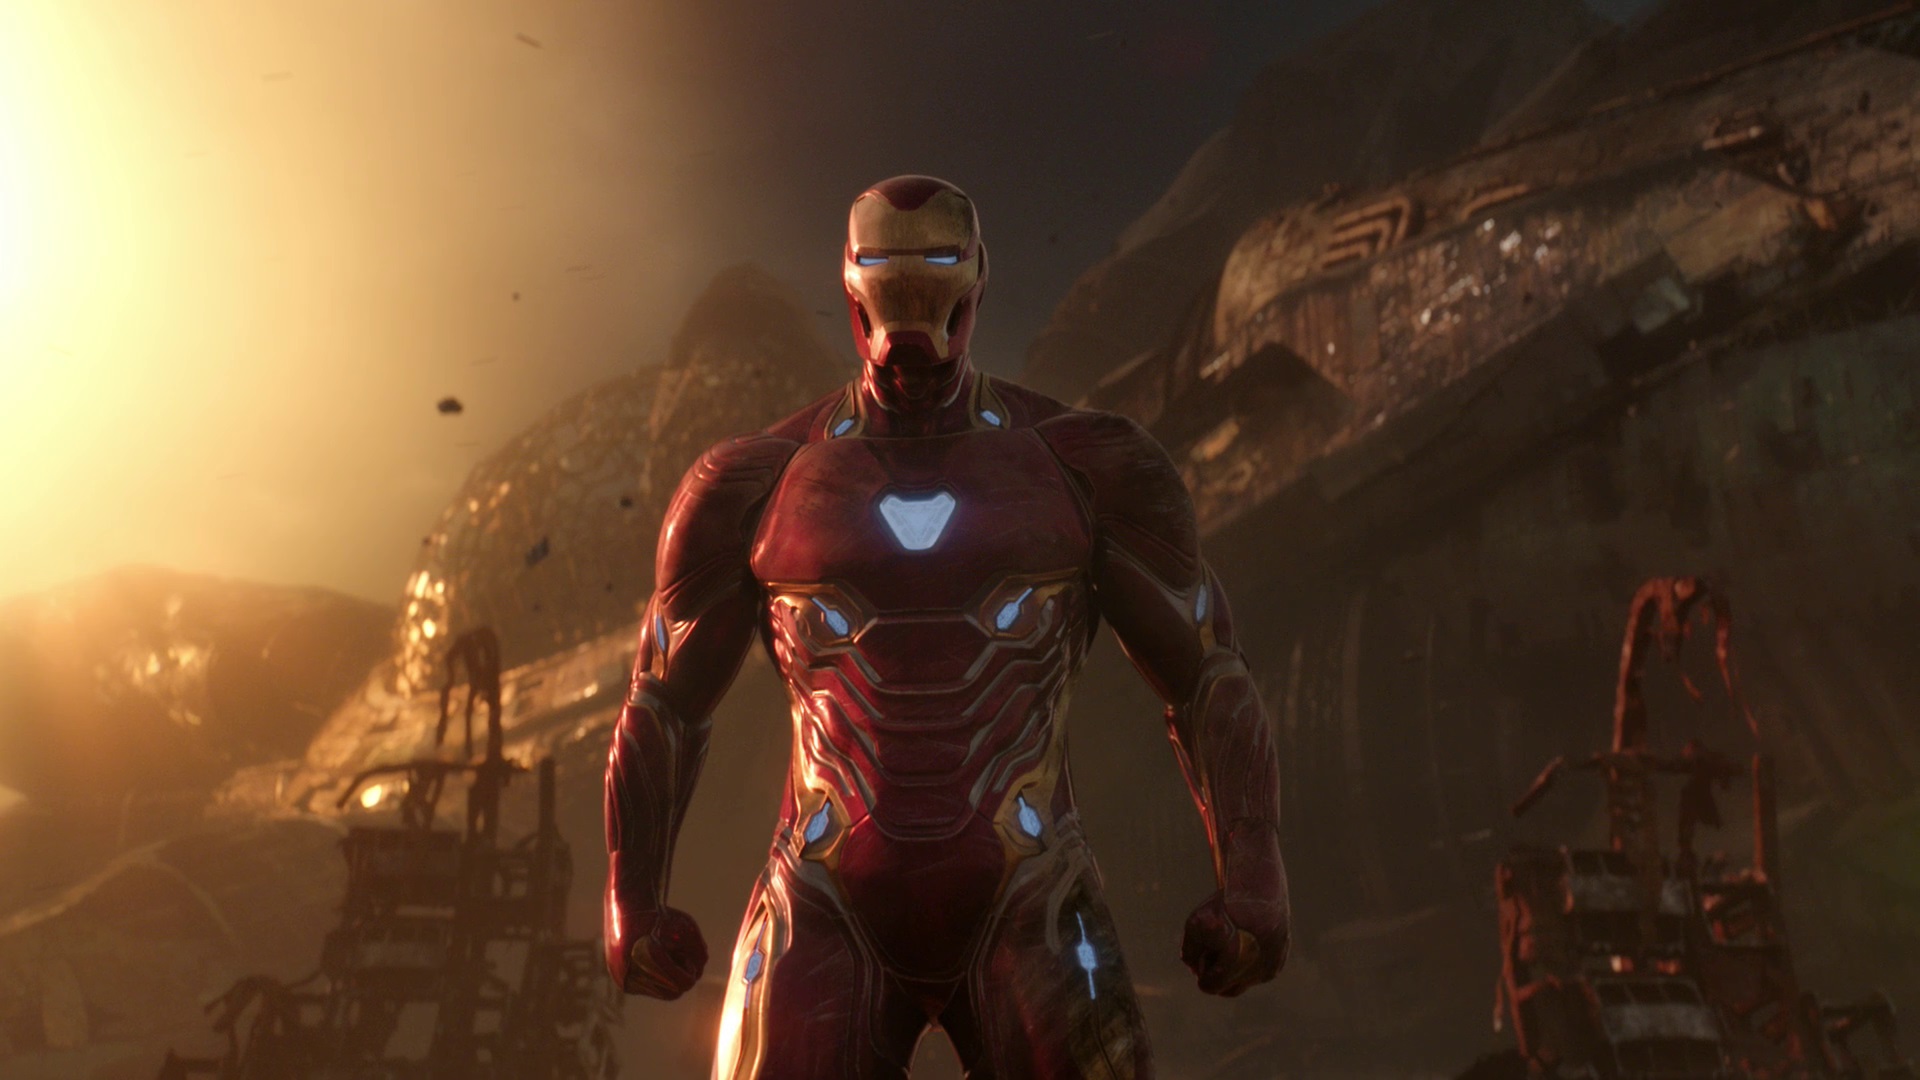 Go behind-the-scenes of Avengers: Infinity War with Titan